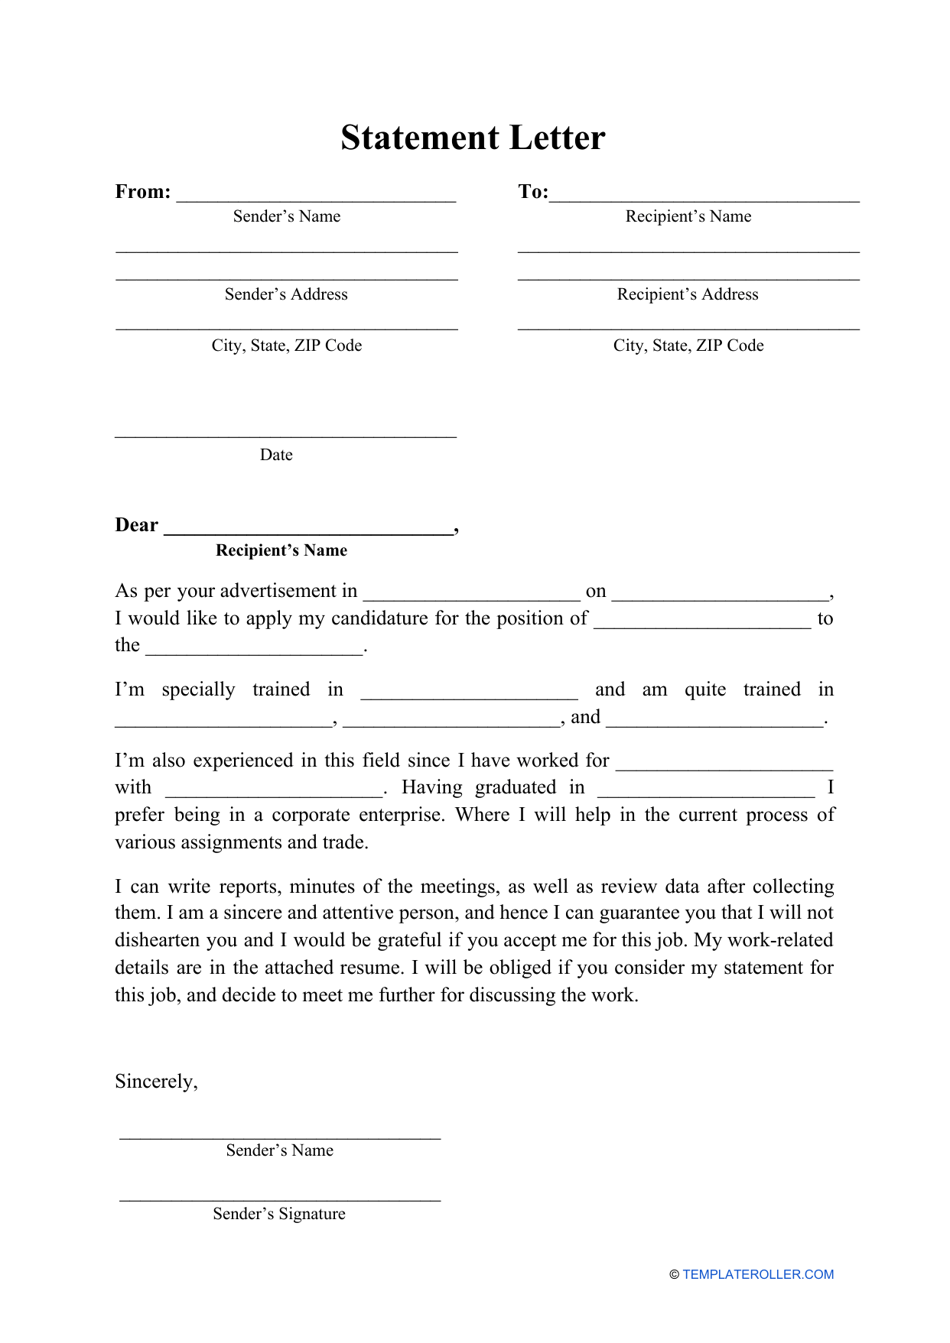 statement-letter-template-download-printable-pdf-templateroller